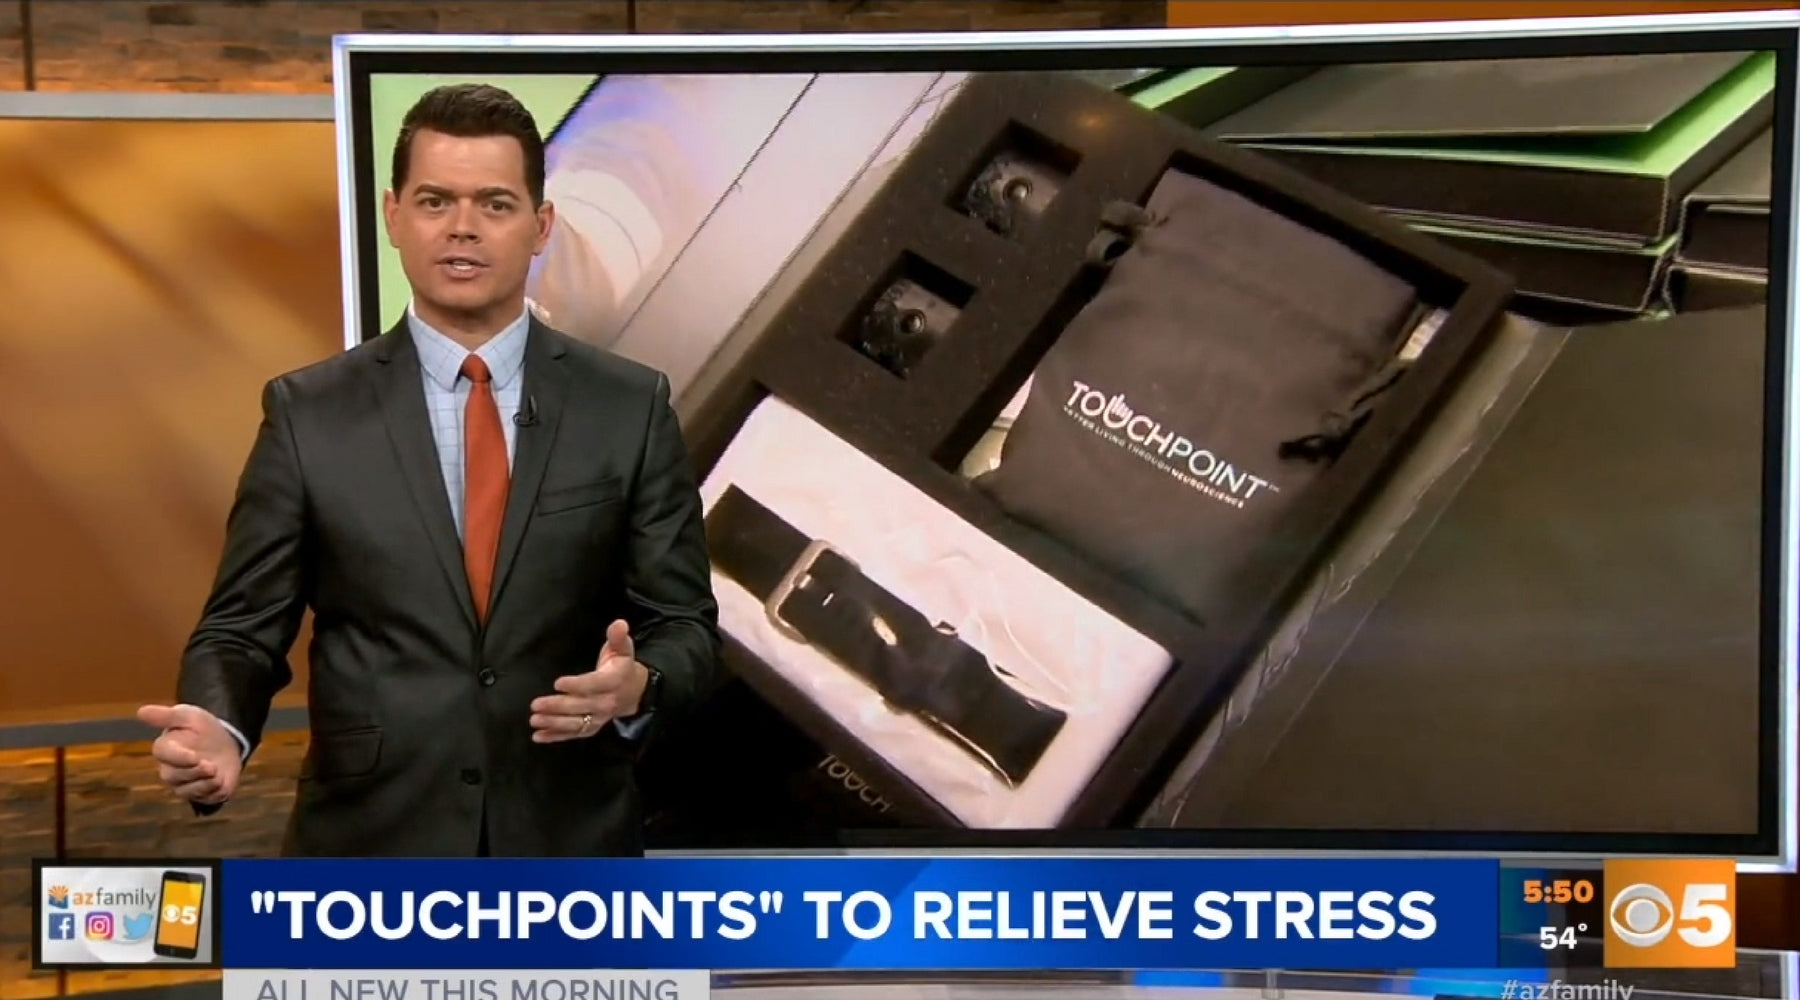 CBS5 - "TouchPoints" to relieve stress